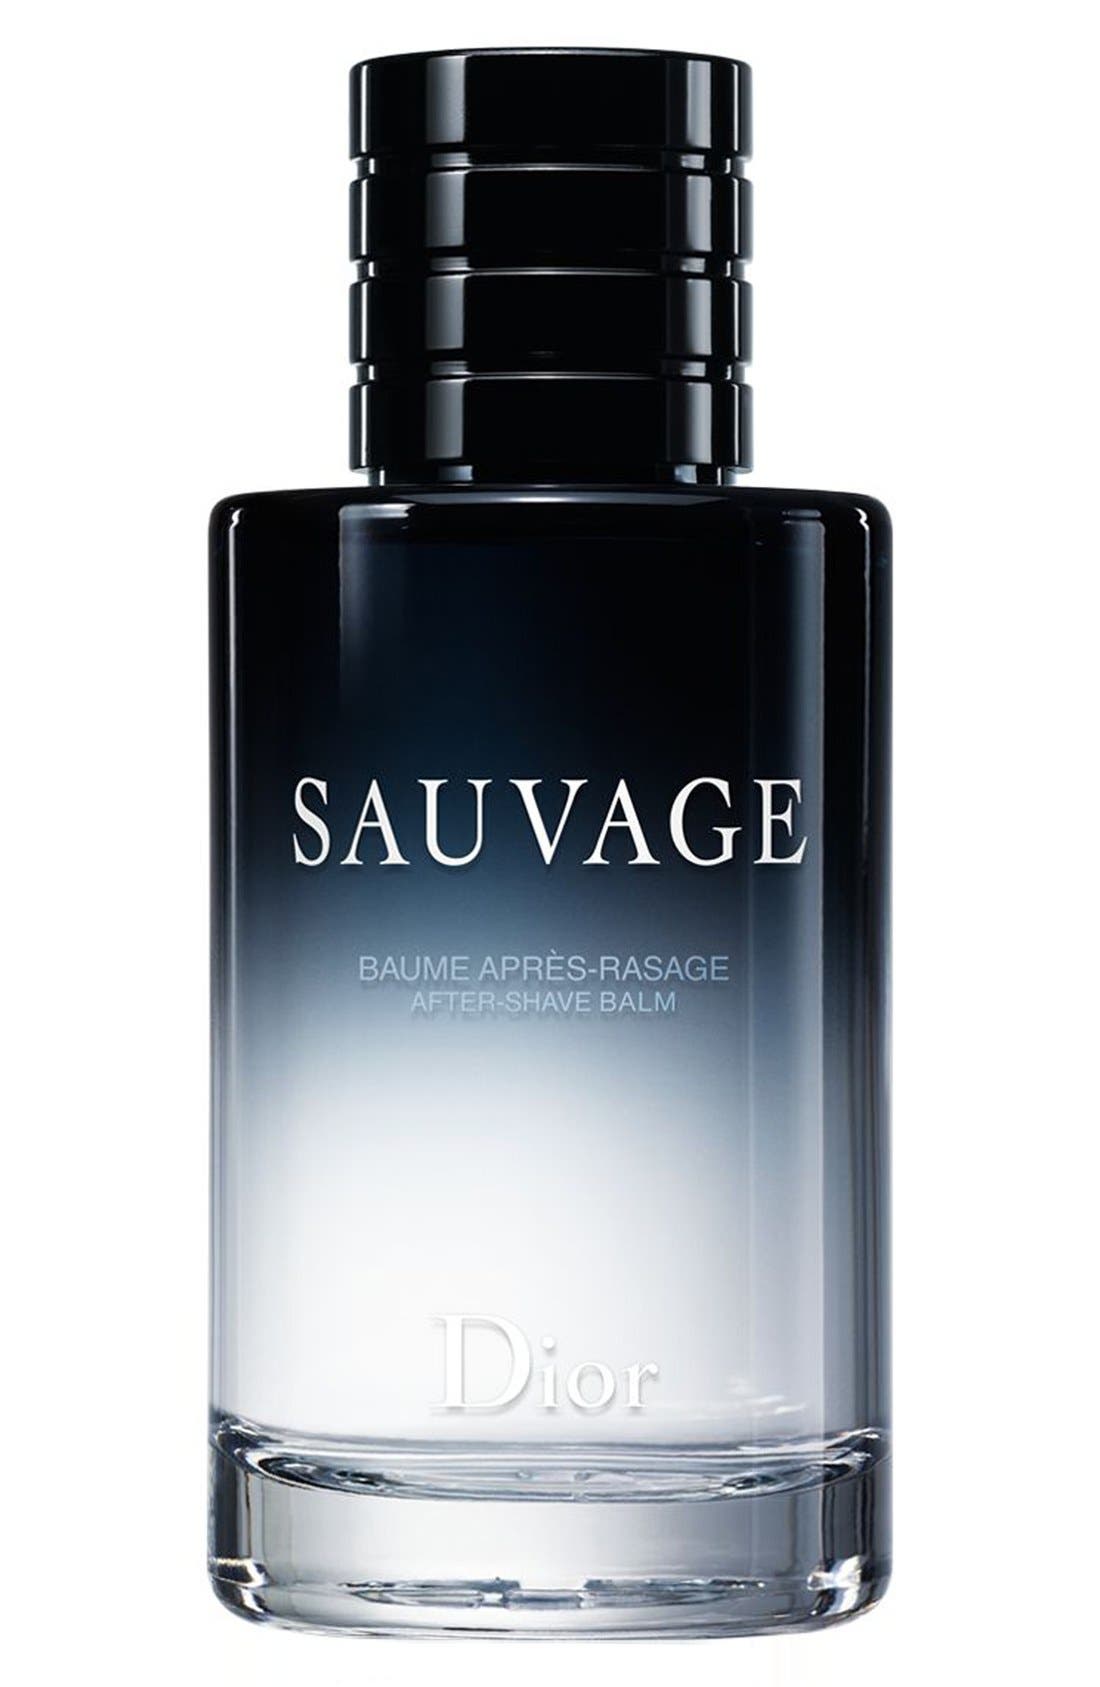 dior sauvage after shave balm review